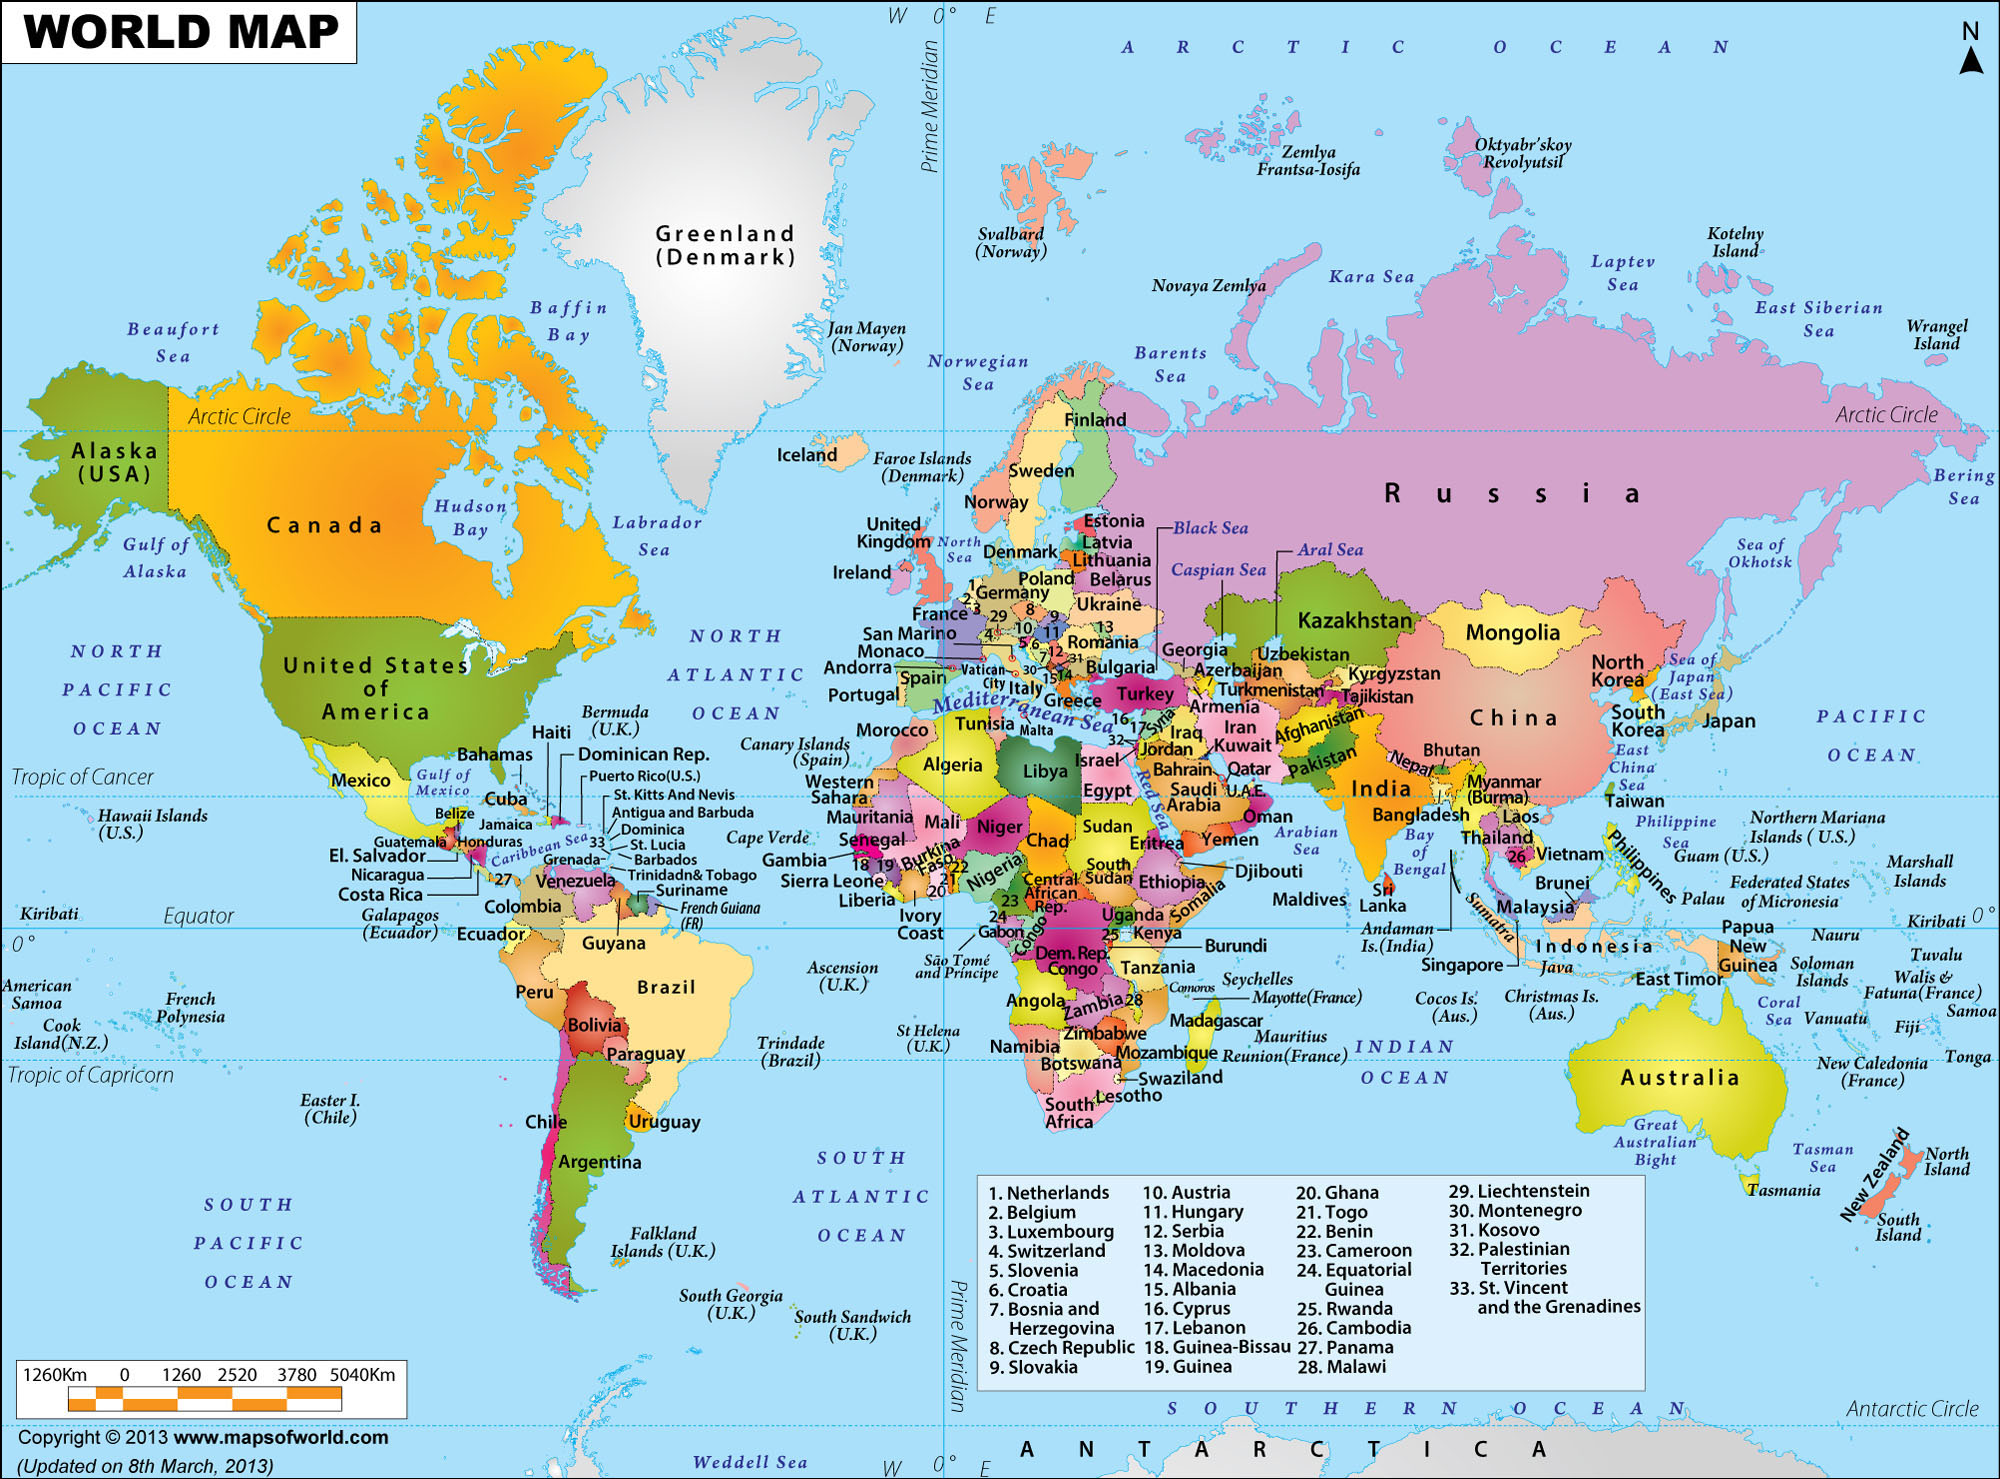 A political map of the world in 2014